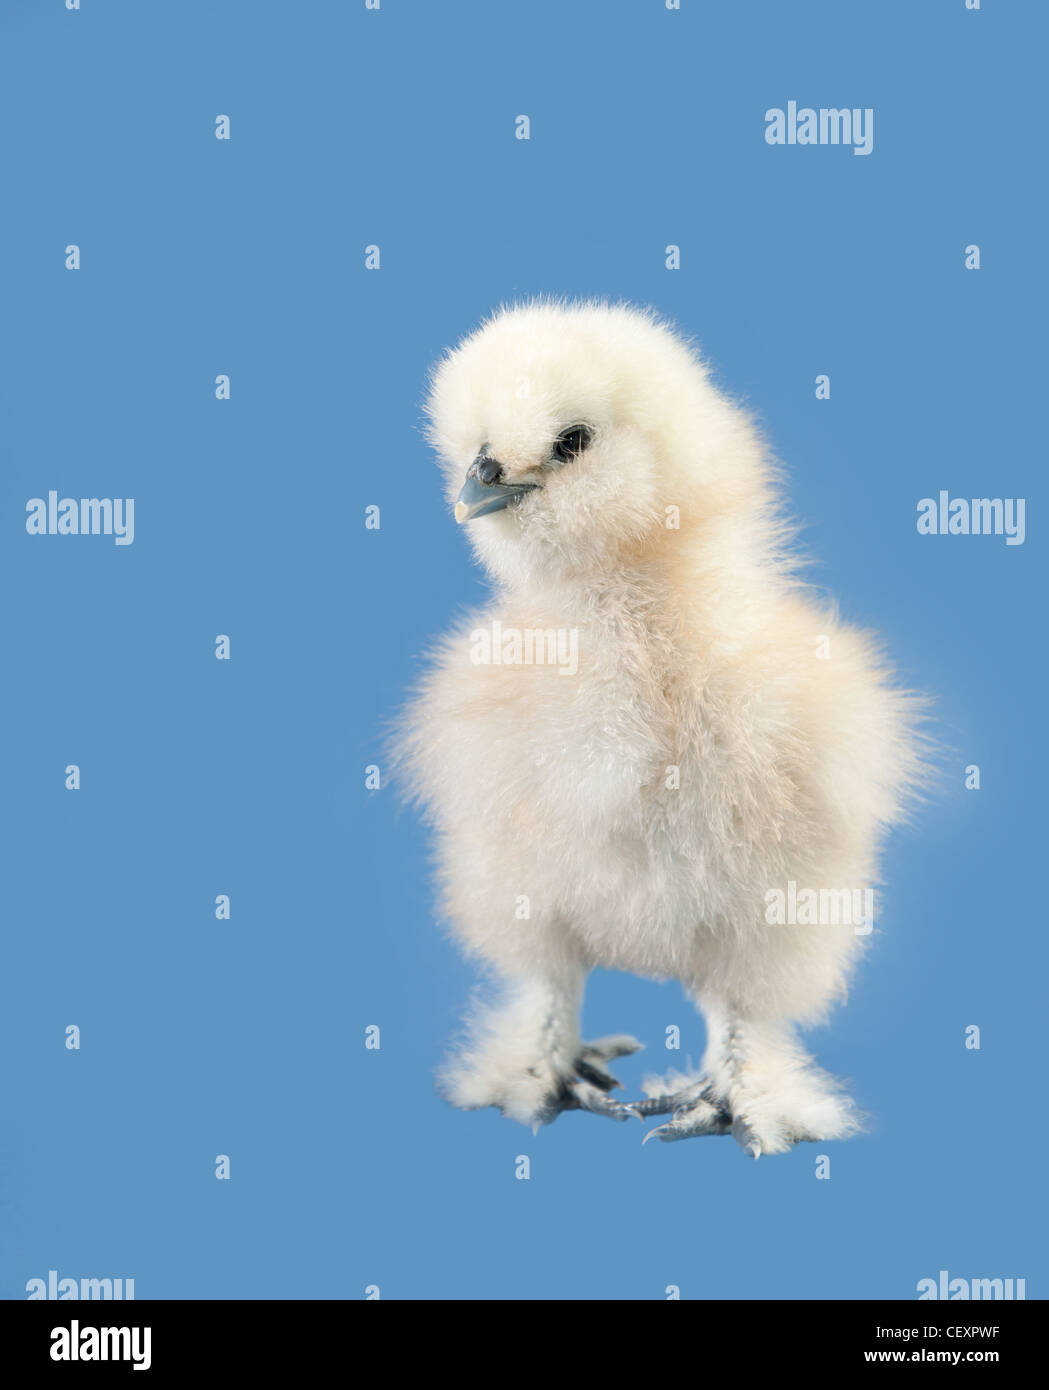 Adorable fluffy Easter chick against blue background Stock Photo